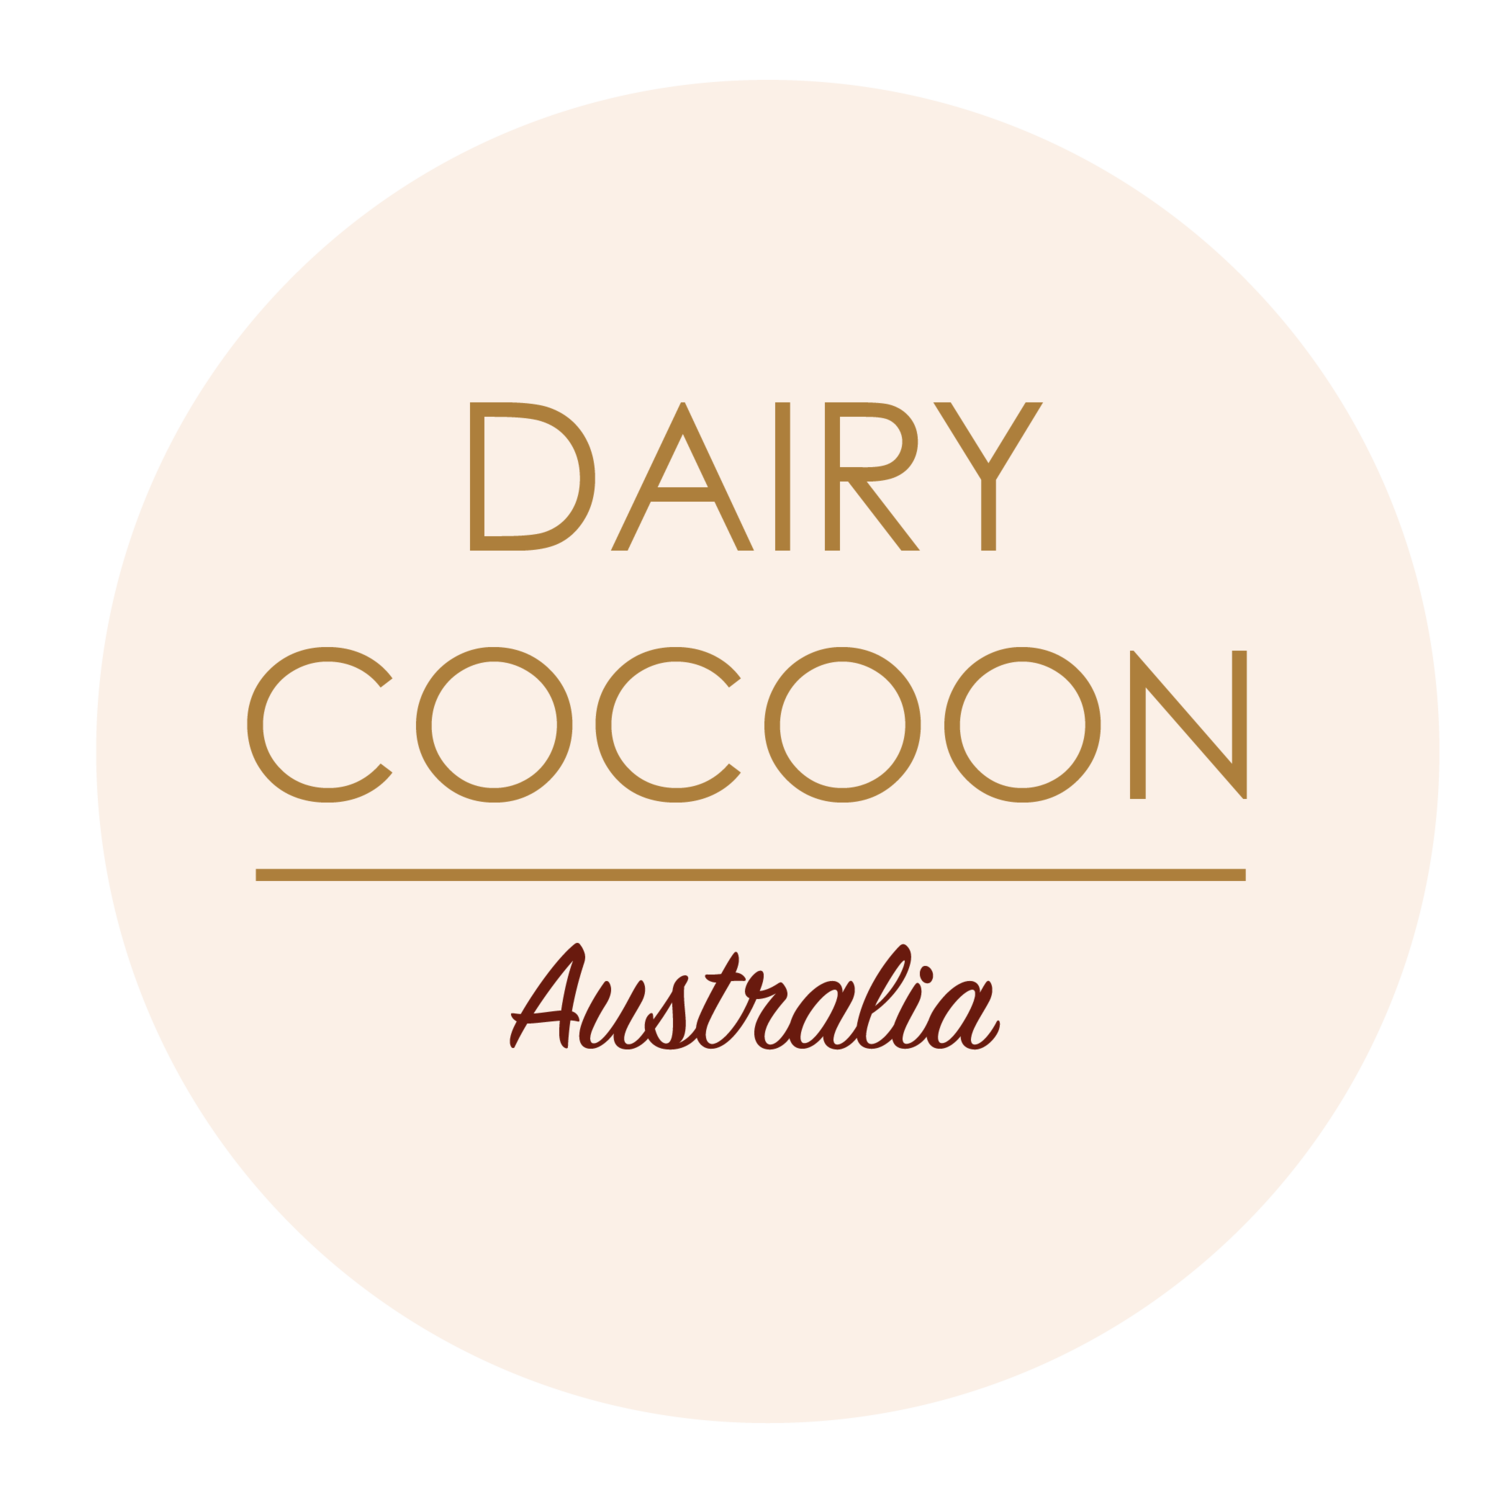 Dairy Cocoon